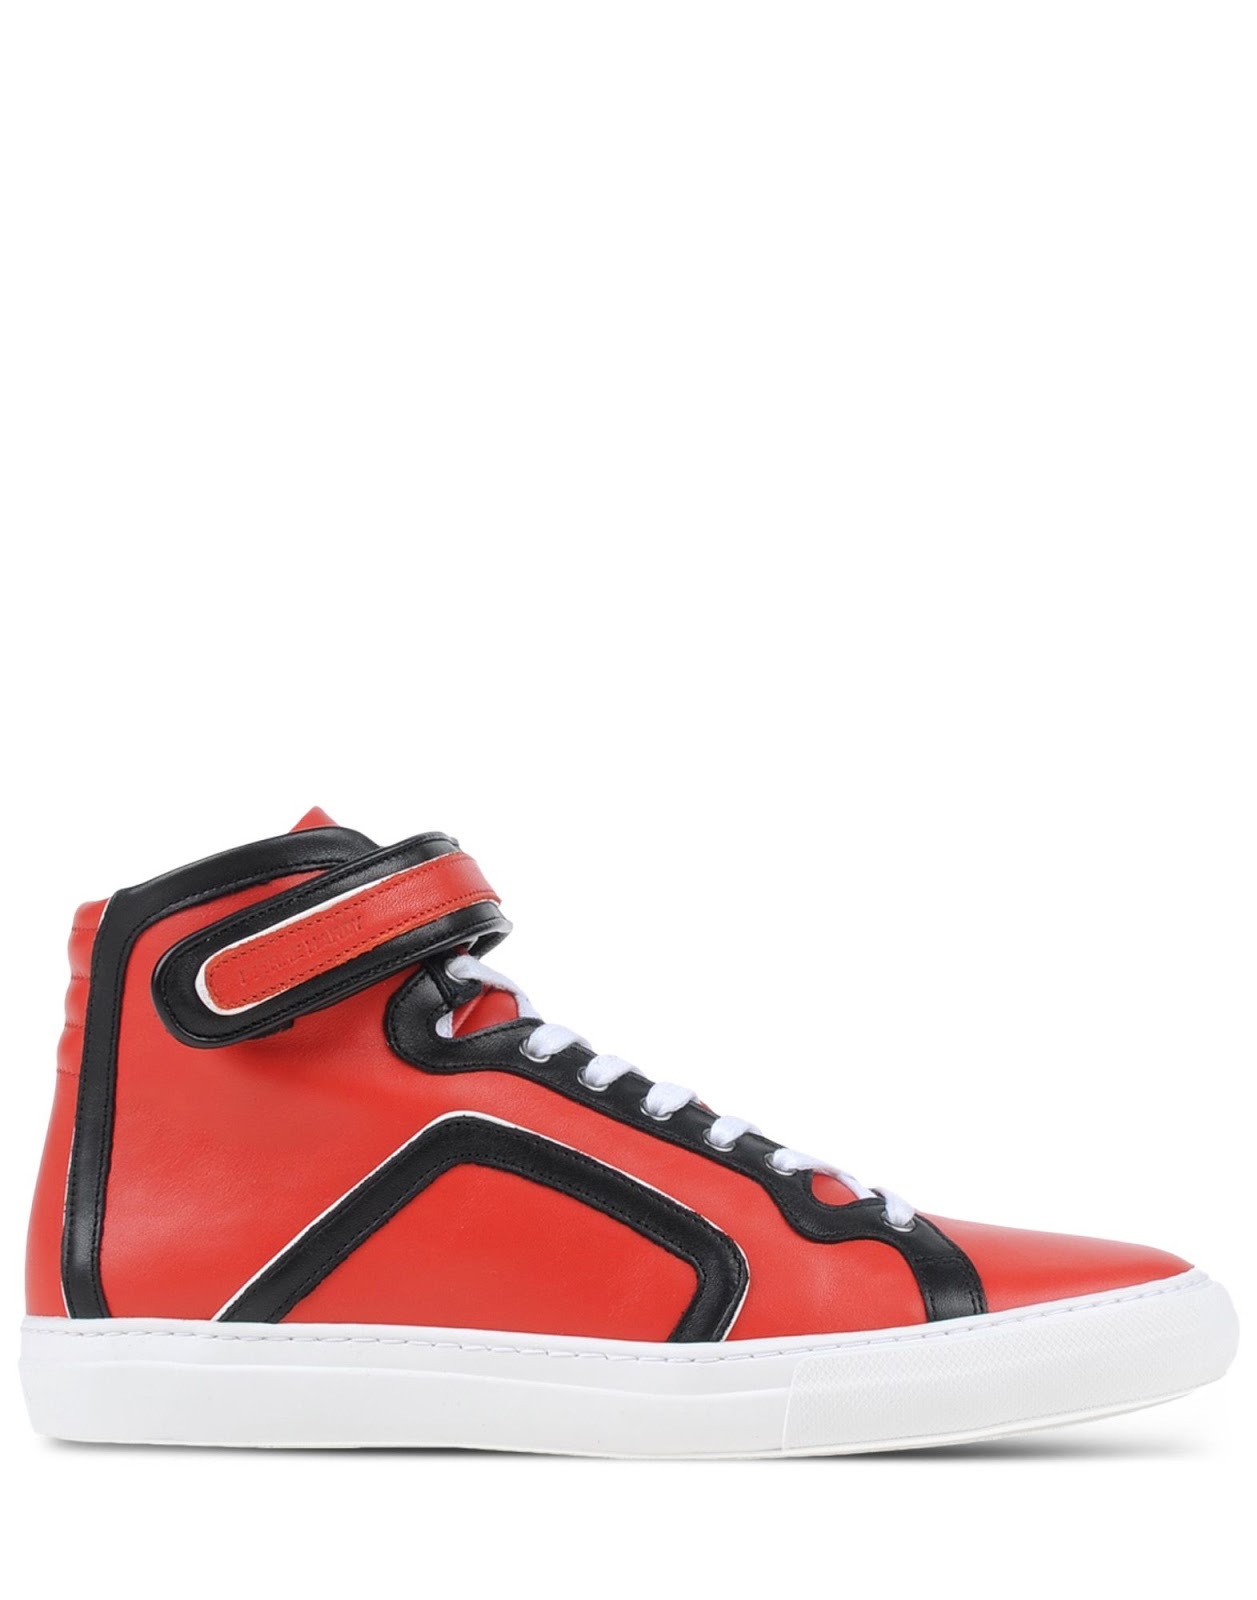 Red Dawn: Pierre Hardy High Tops | SHOEOGRAPHY